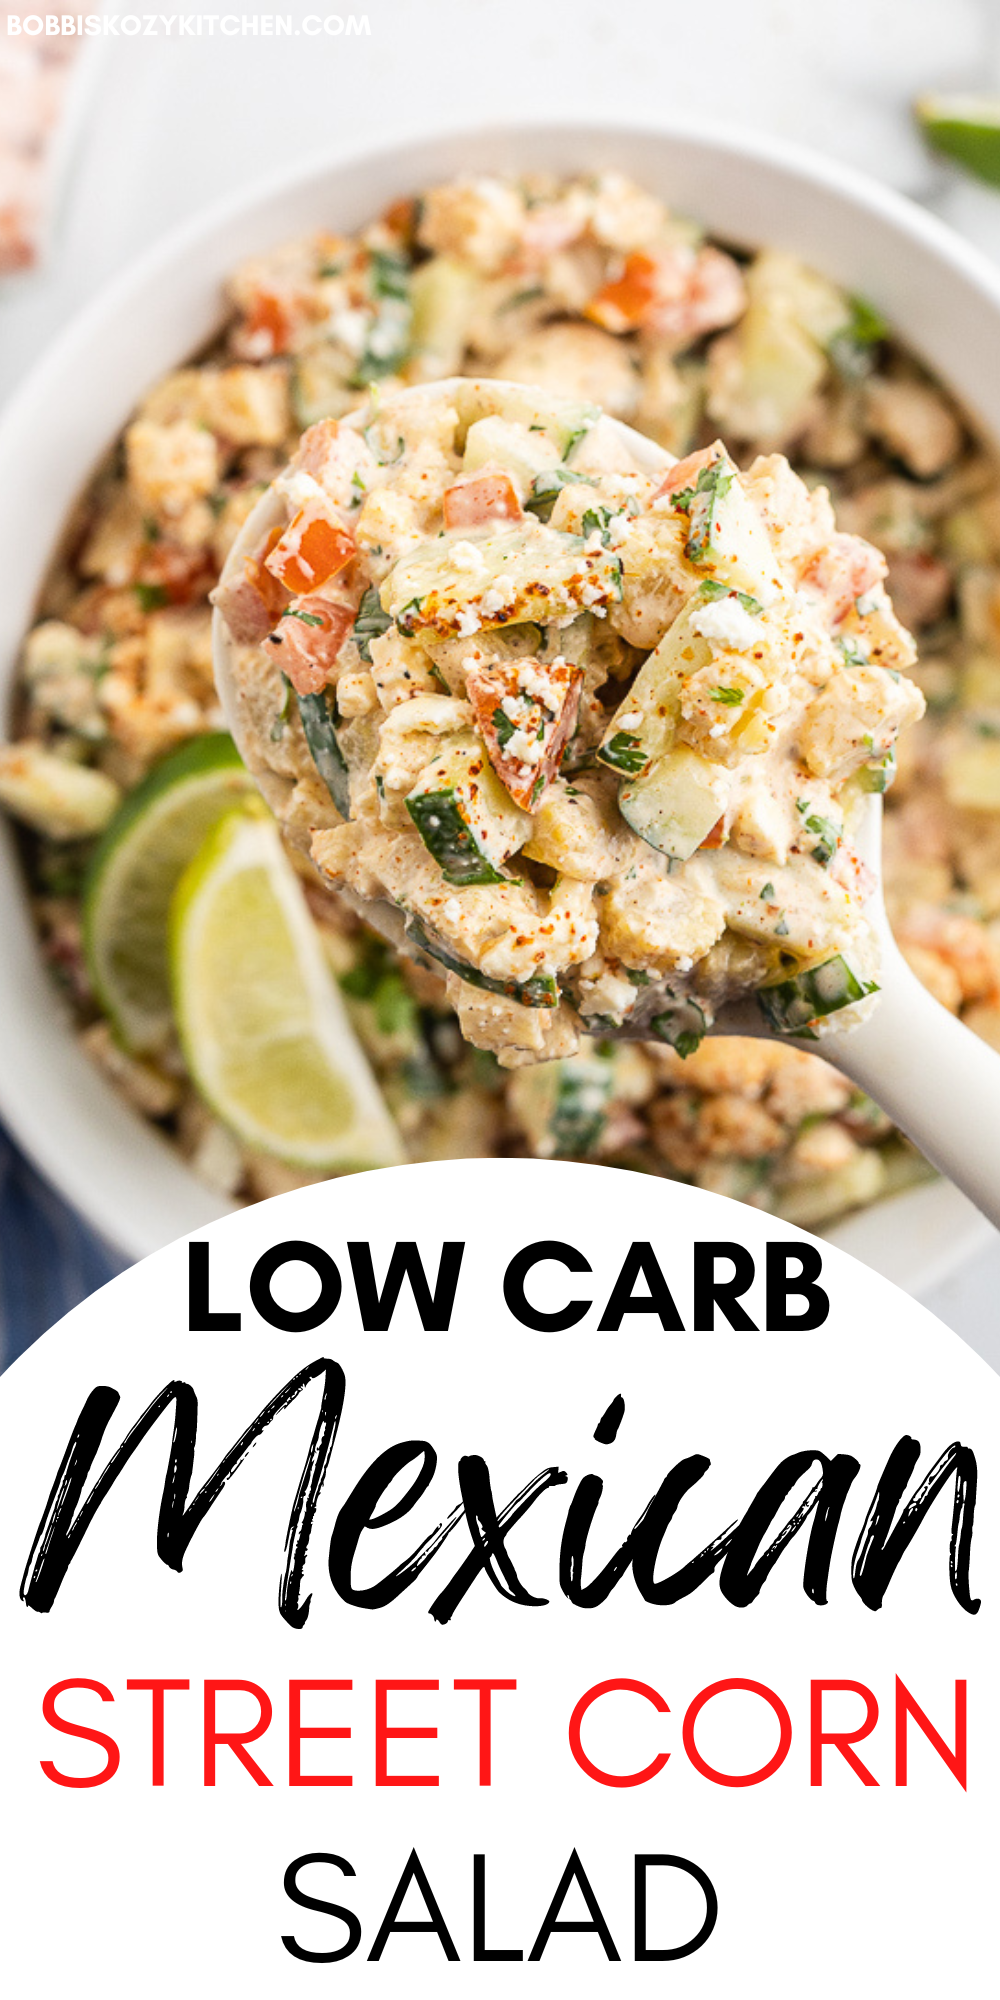 Pinterest graphic with the image of Low Carb Mexican Street Corn Salad on it.